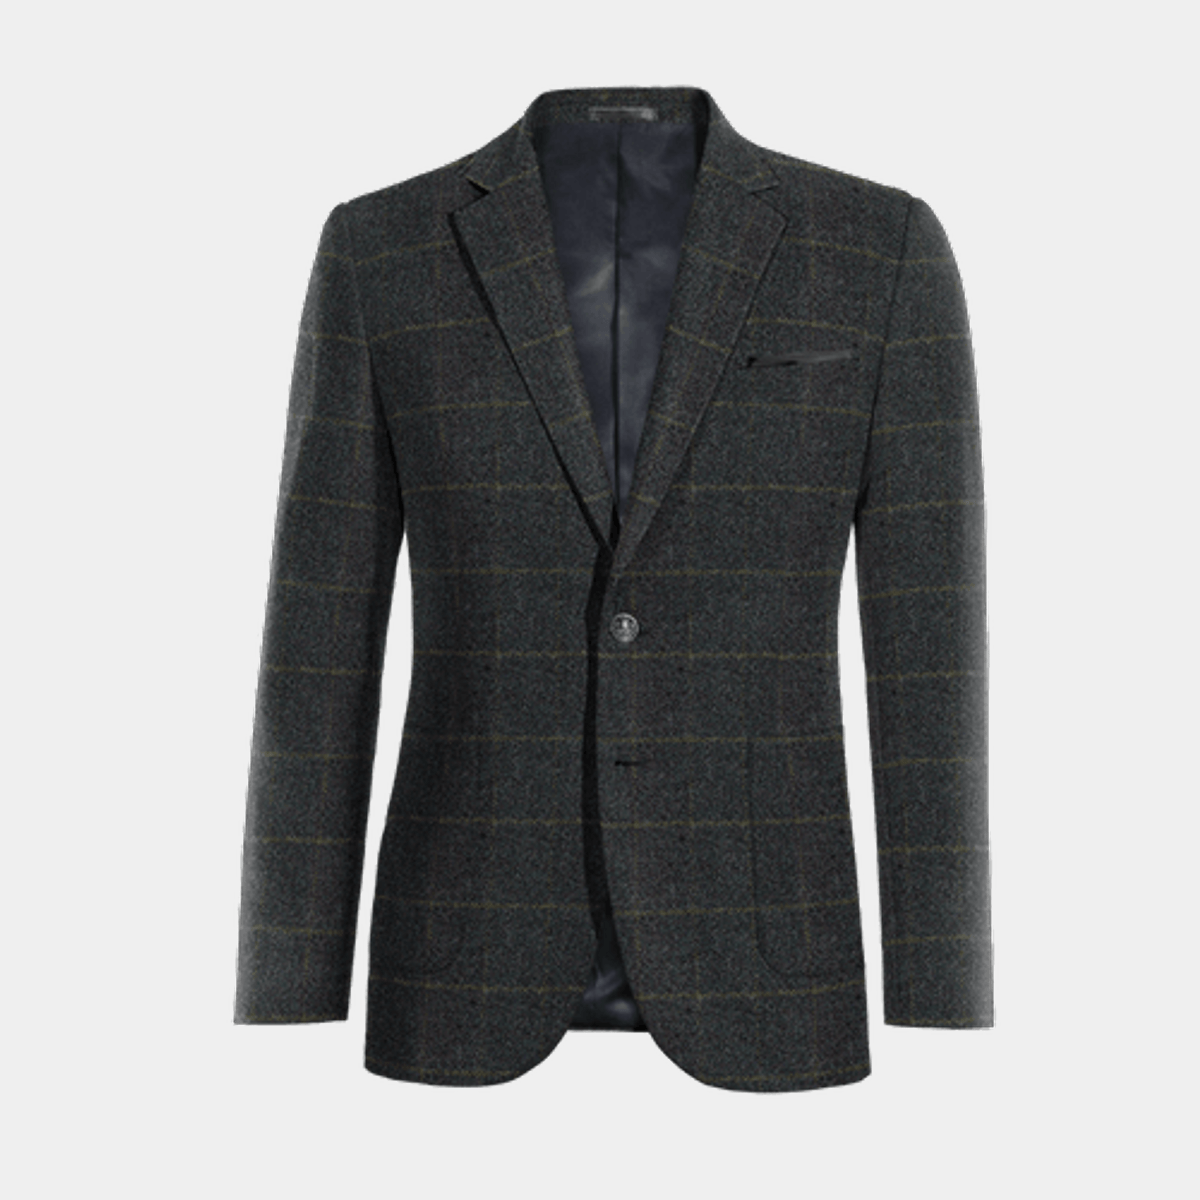 Blue Checkered Tweed Suit Jacket with elbow patches | Hockerty